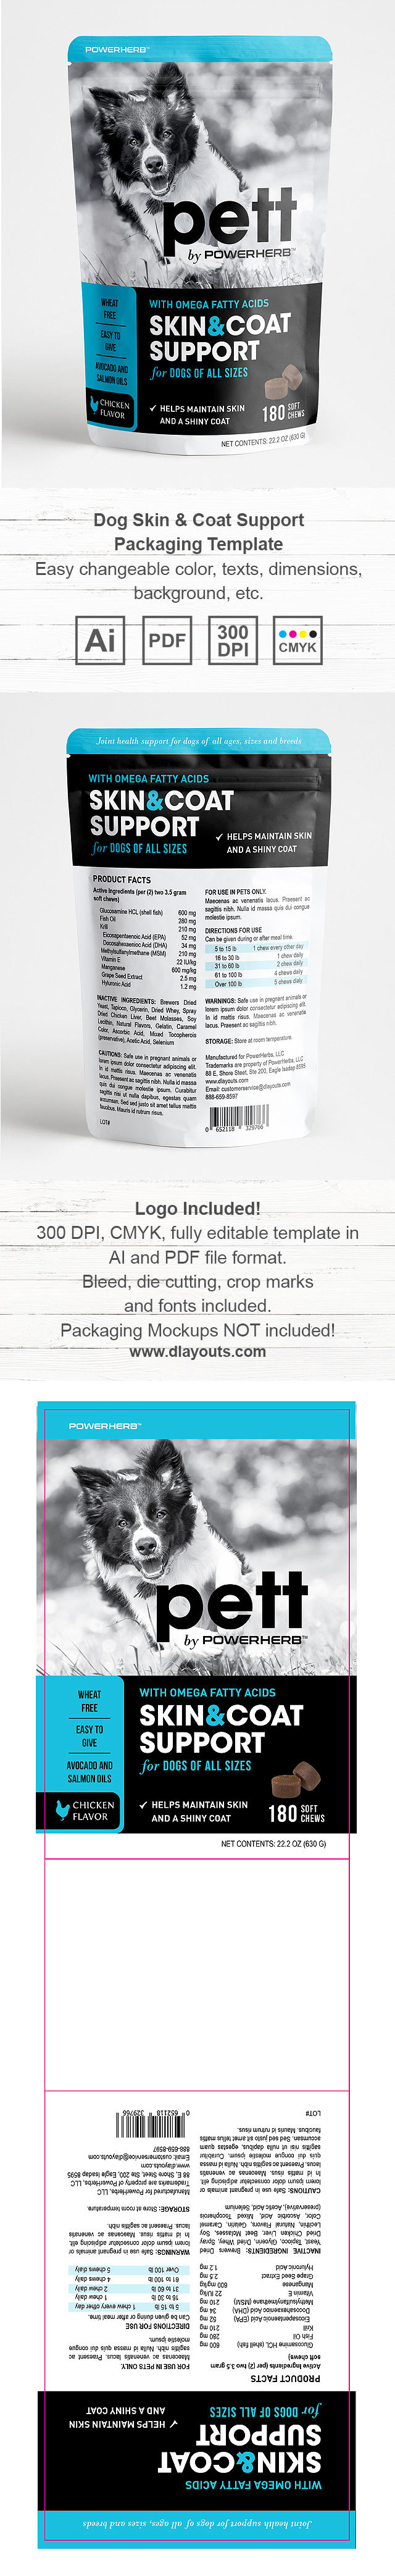 Pet Skin & Coat Support Packaging Template